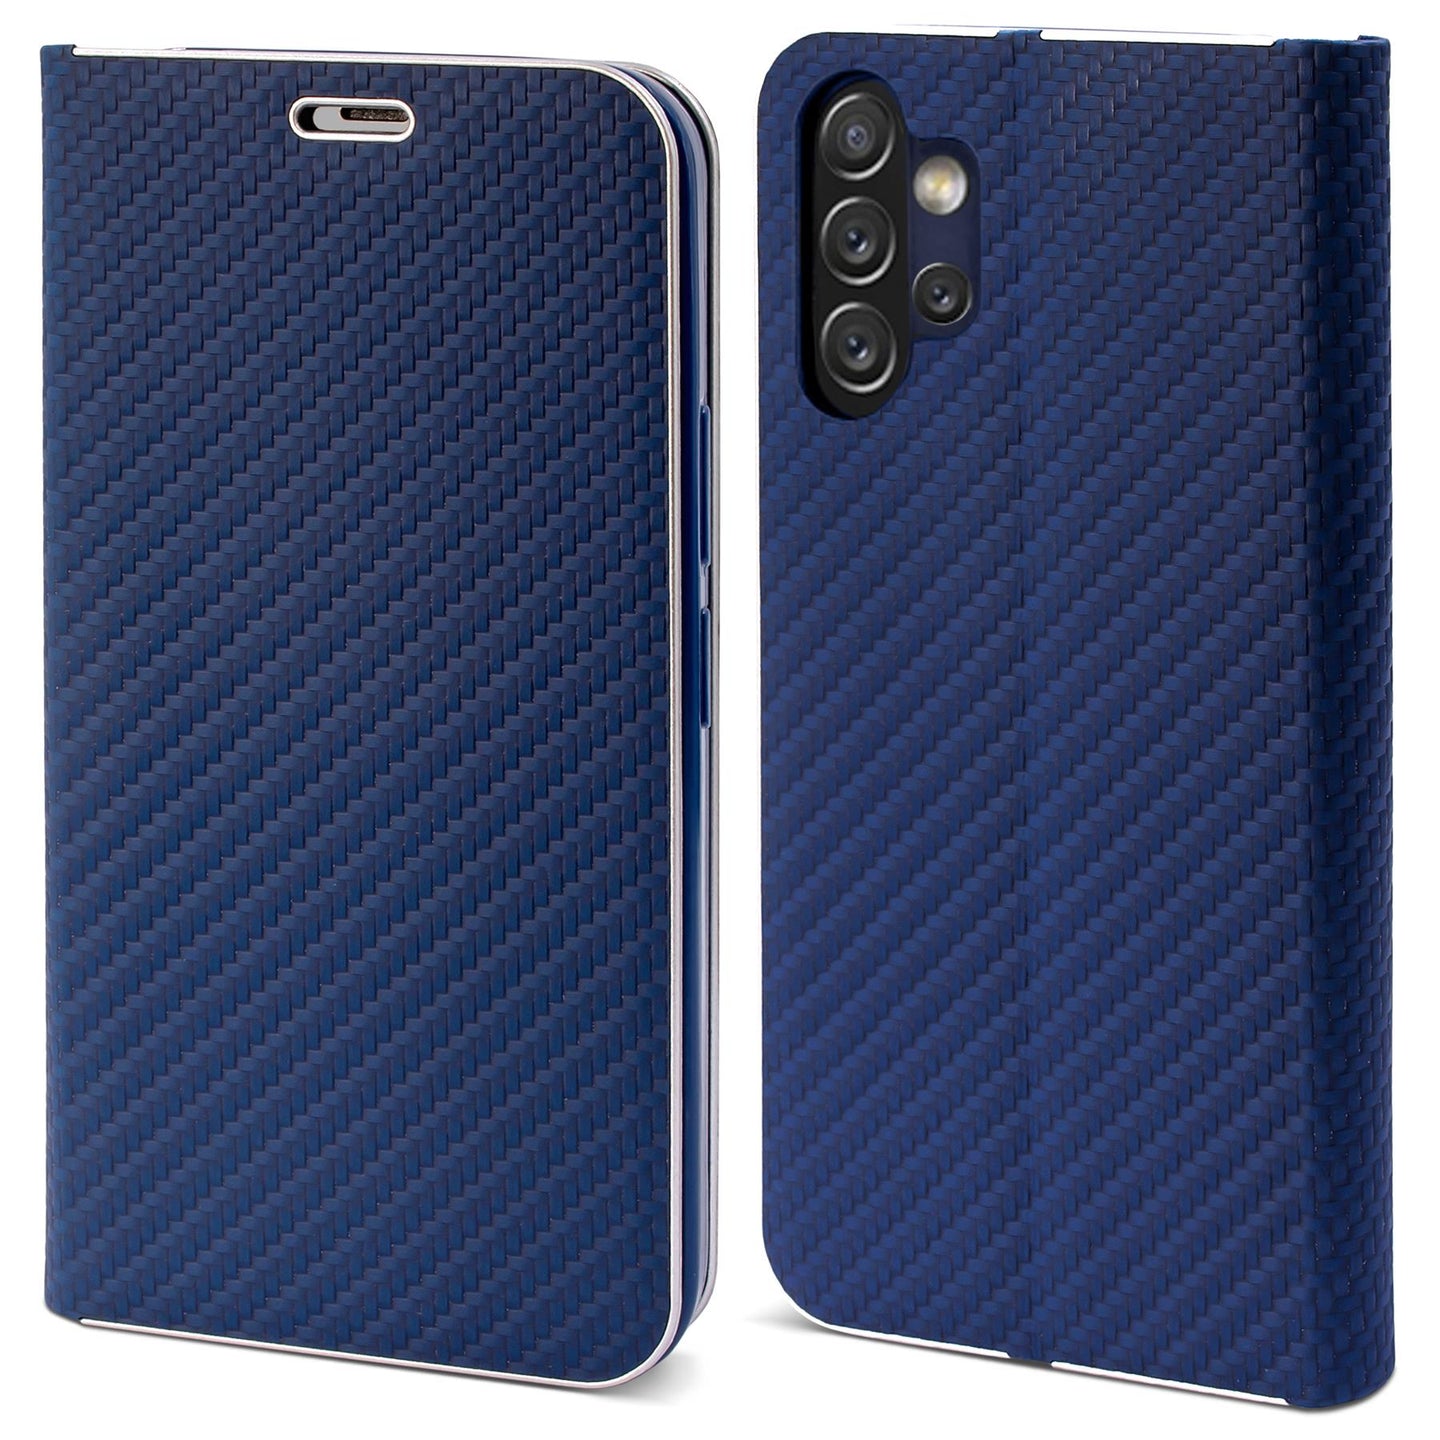 Moozy Wallet Case for Samsung A13, Dark Blue Carbon - Flip Case with Metallic Border Design Magnetic Closure Flip Cover with Card Holder and Kickstand Function